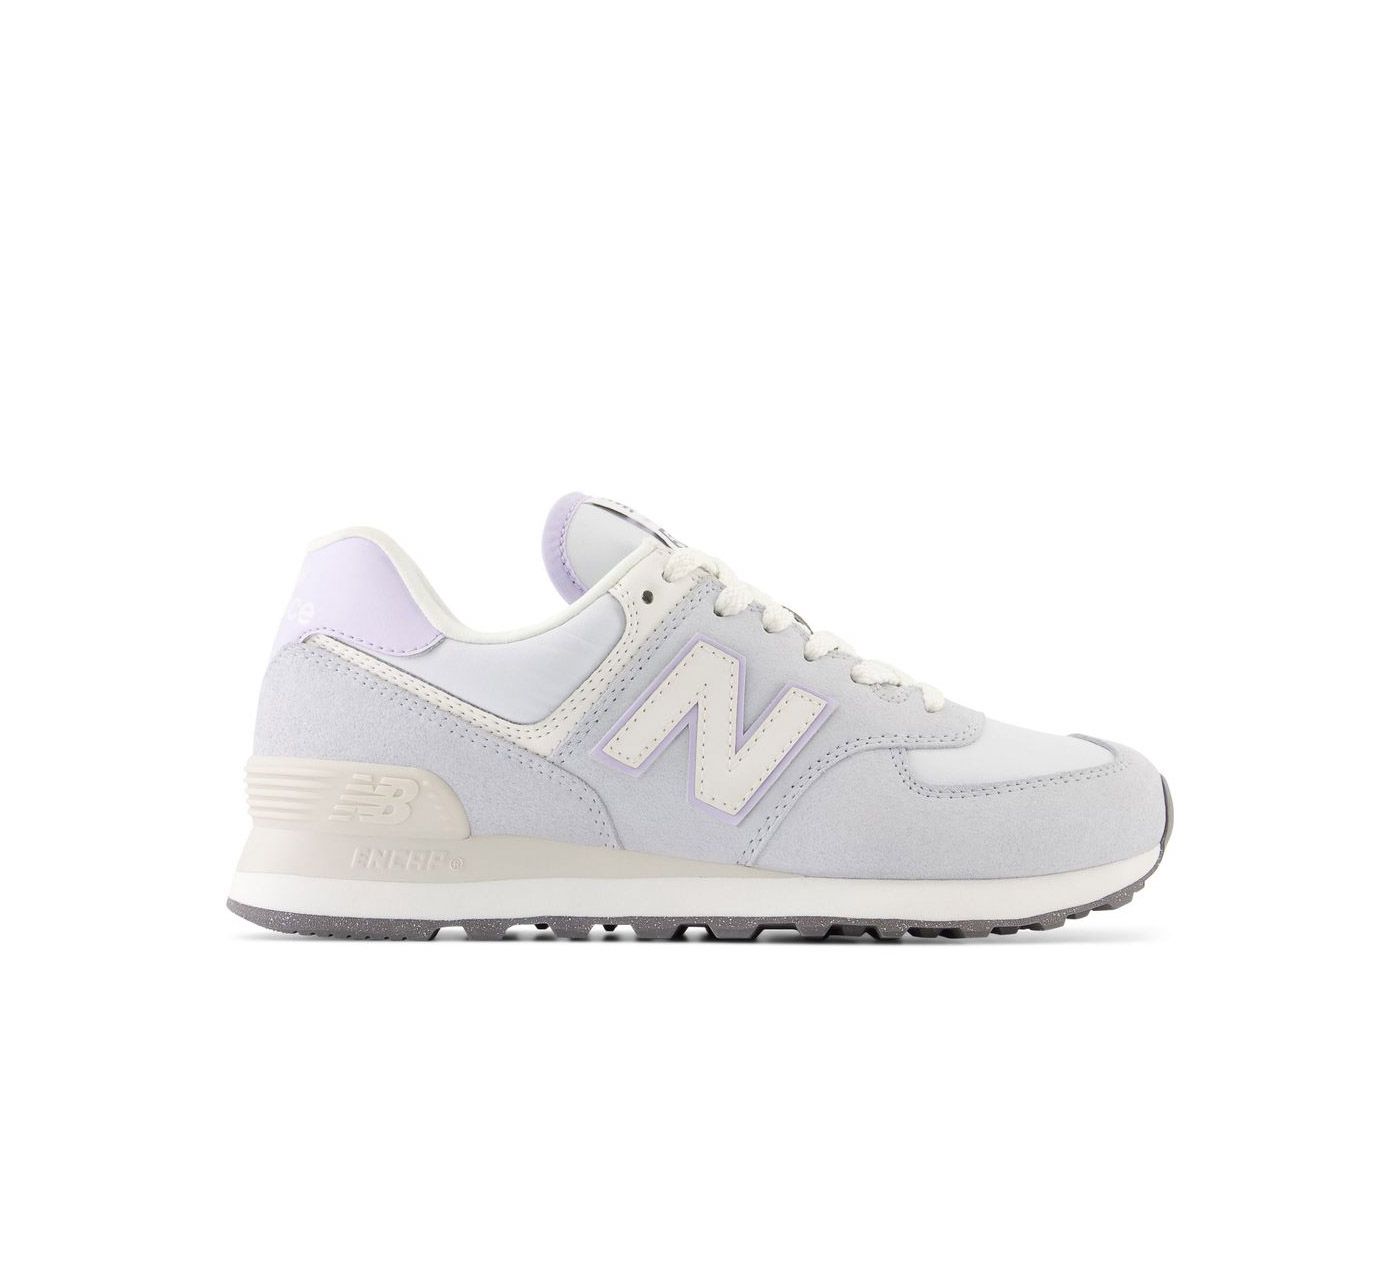 New Balance 574 trainers in grey